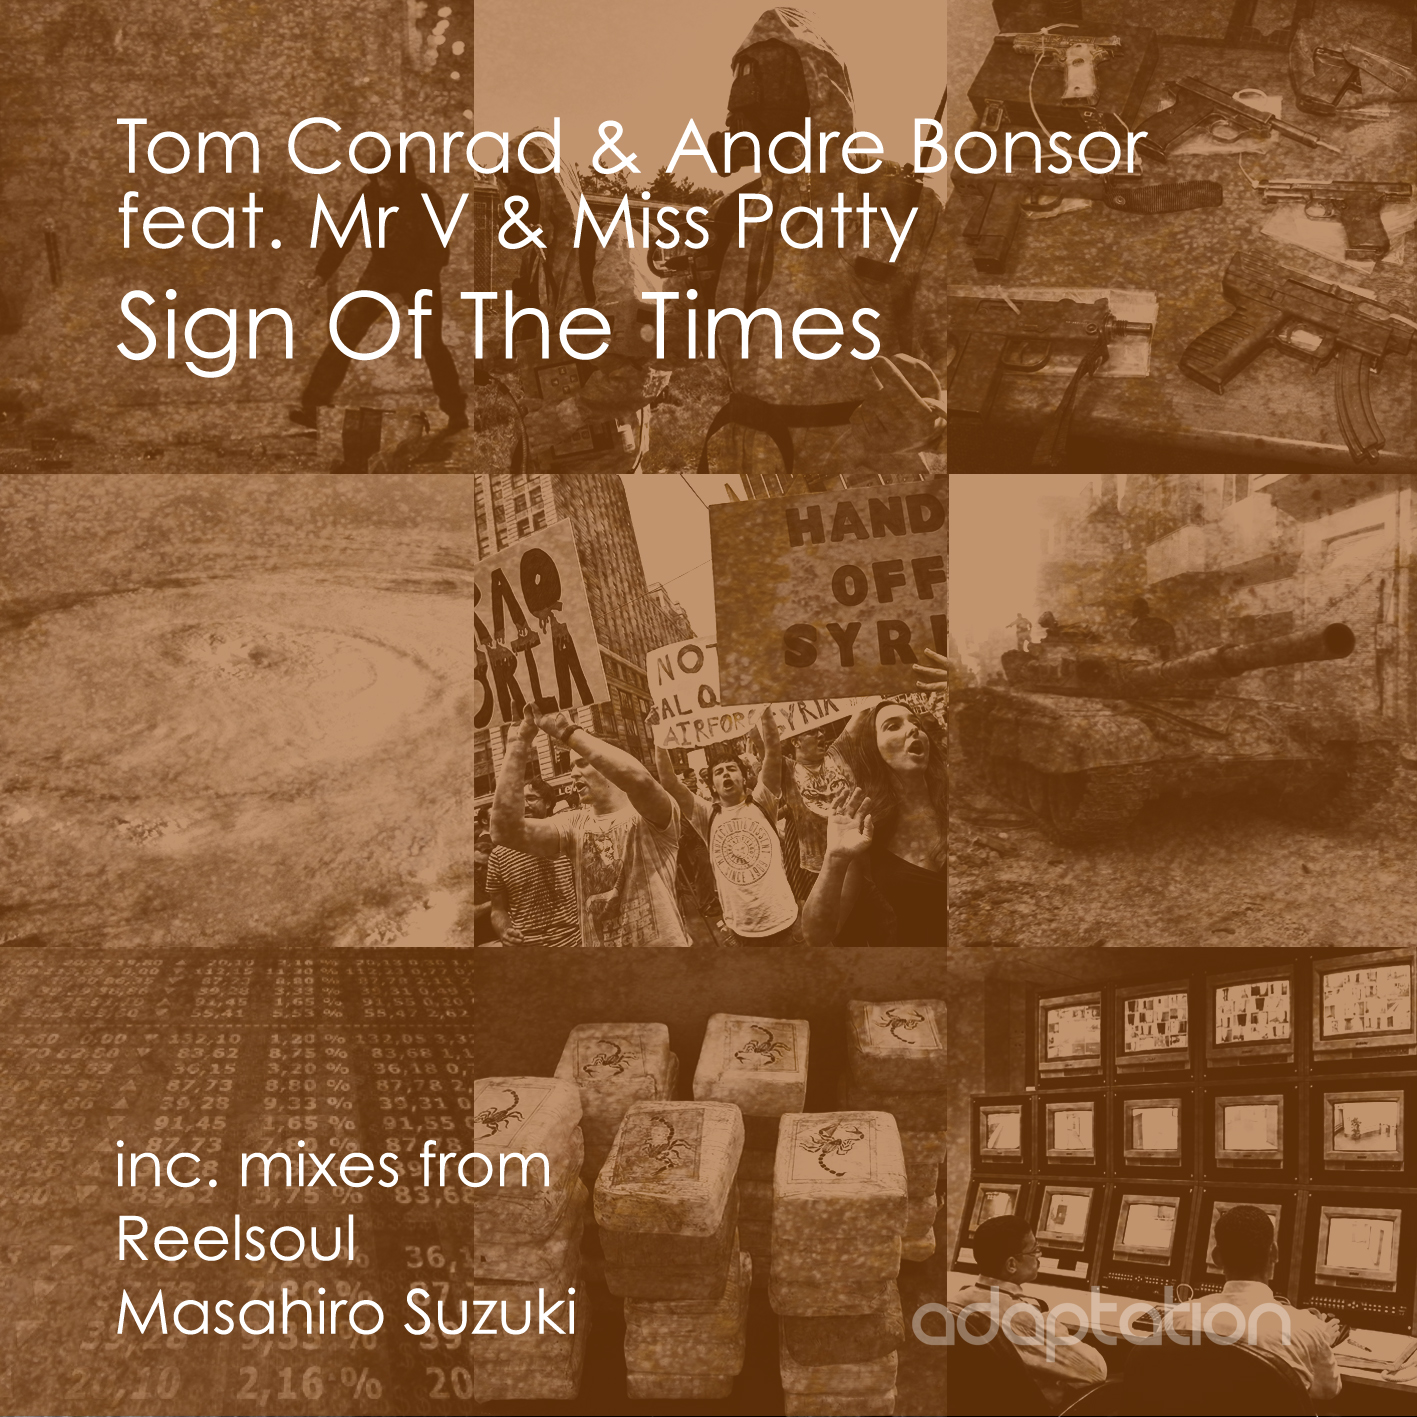 Tom Conrad & Andre Bonsor – Sign Of The Times